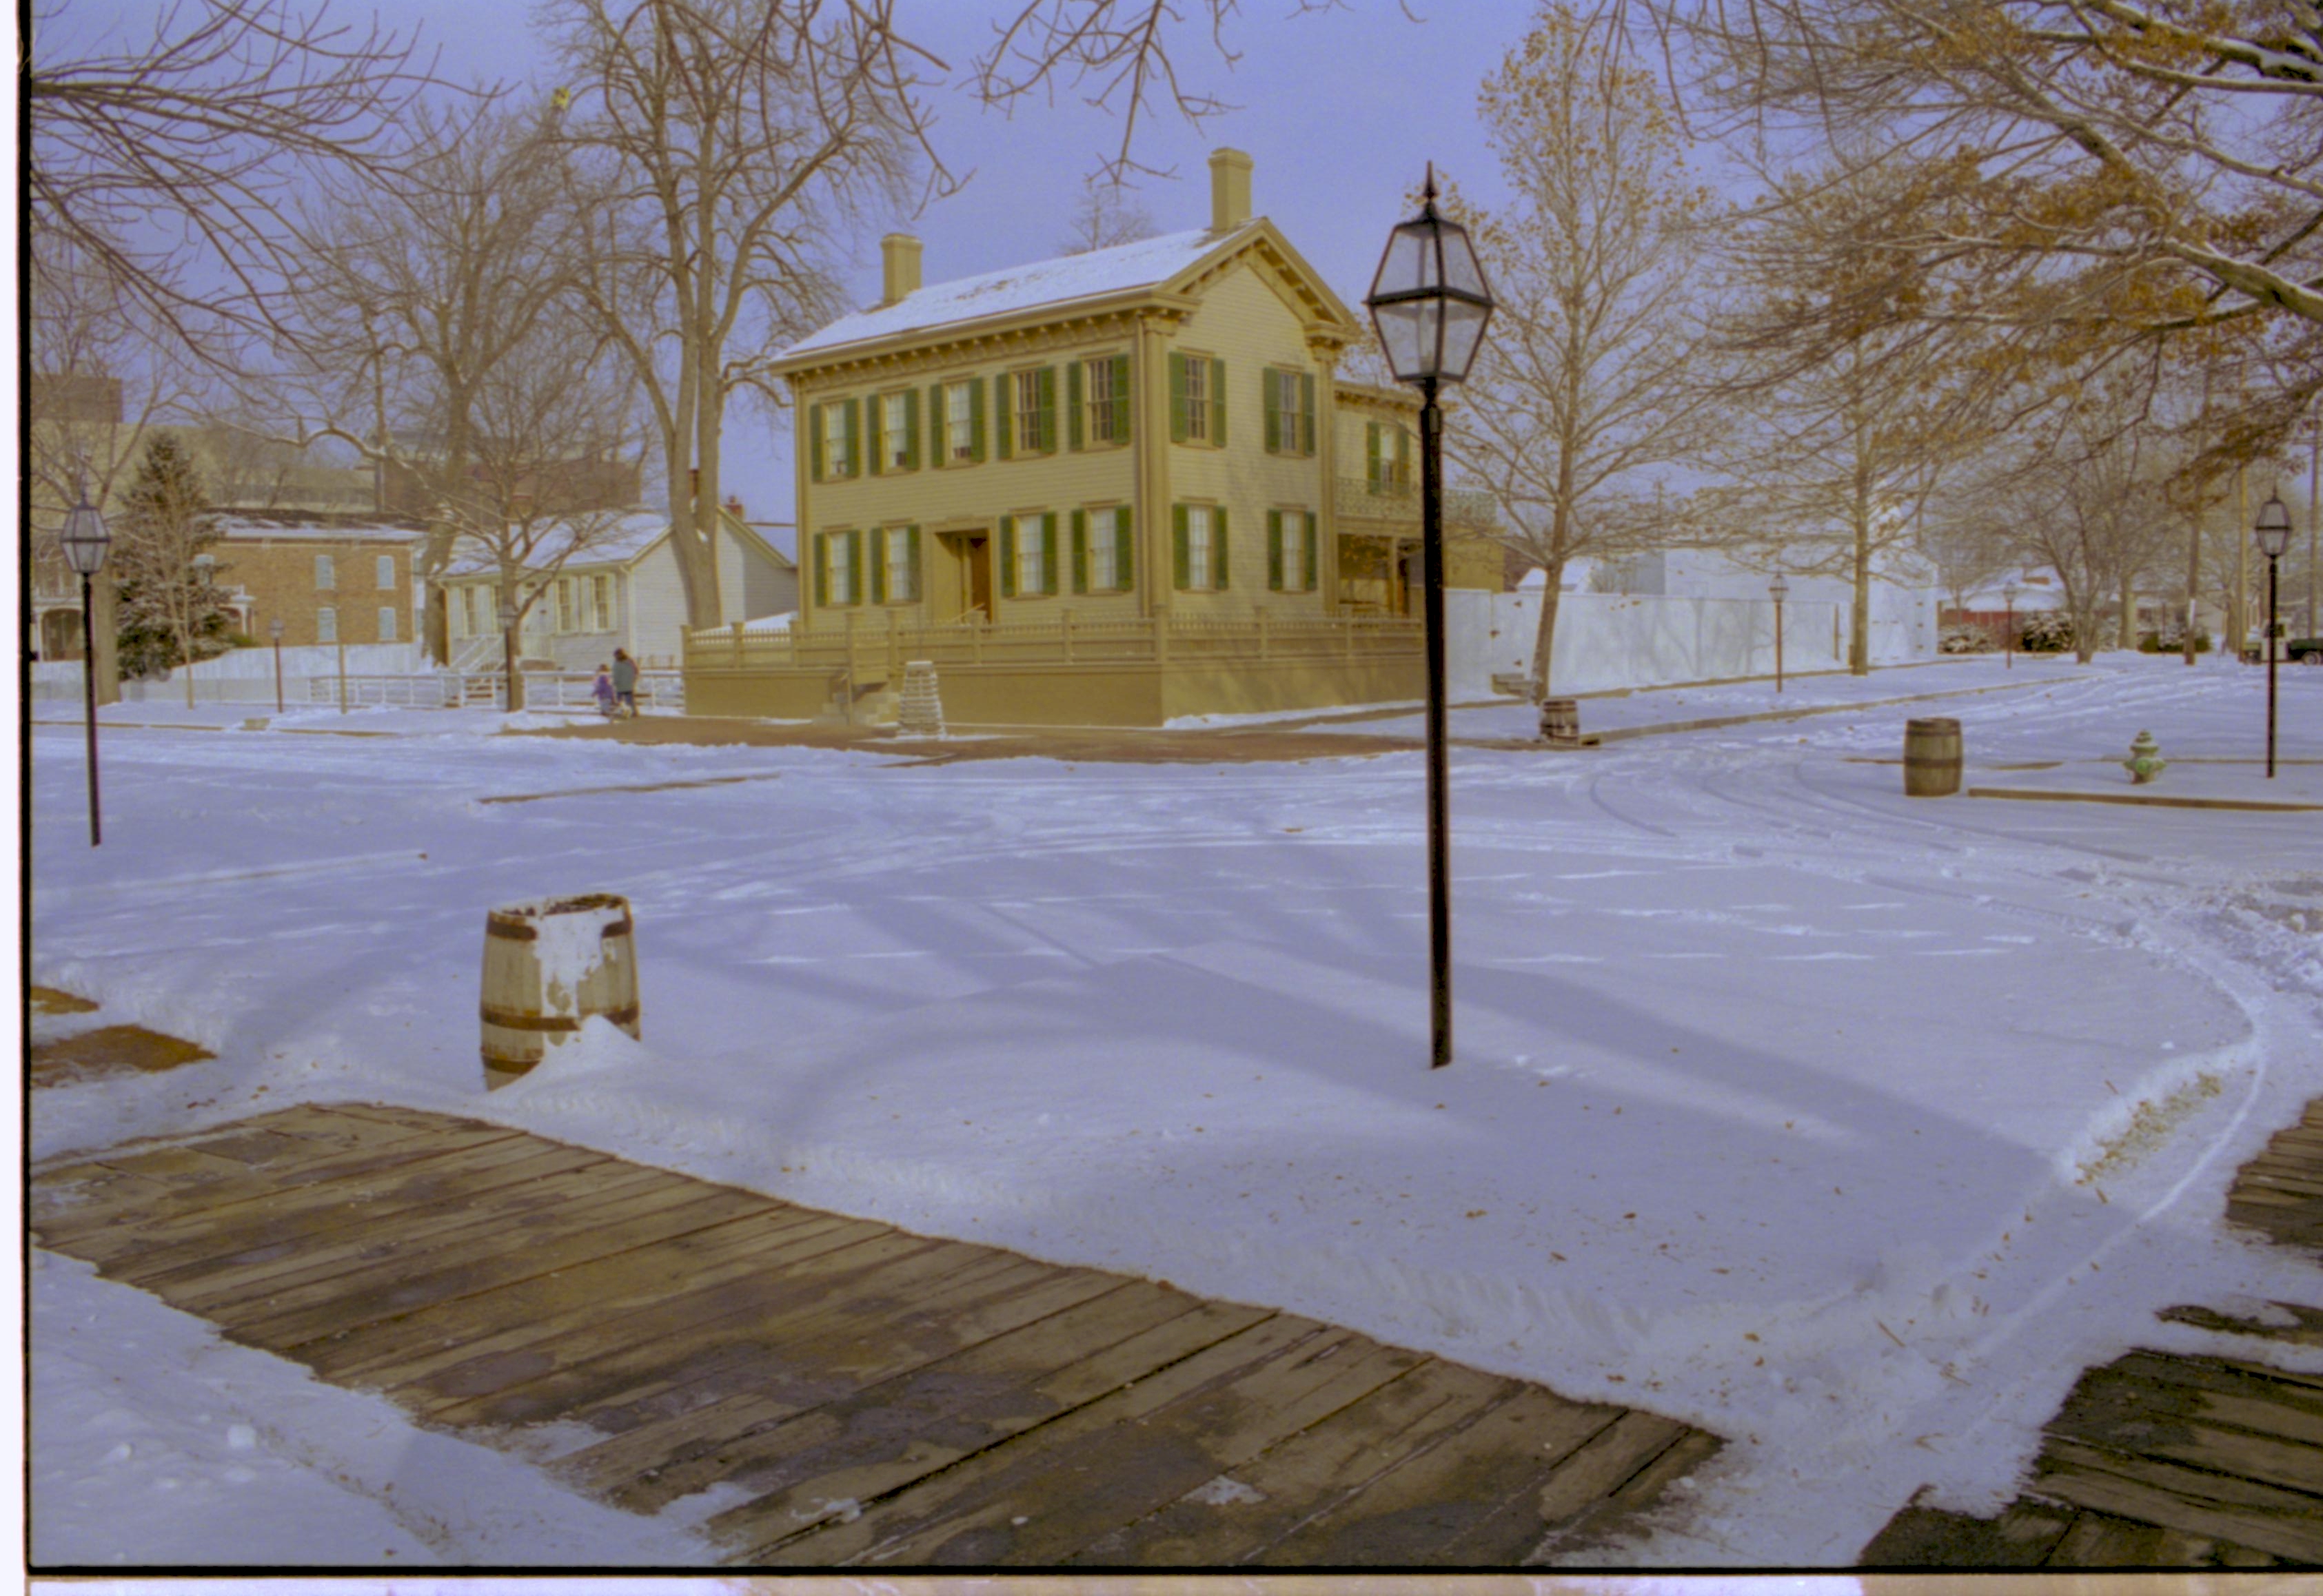 Lincoln neighborhood in snow, Lincoln Home in center, cleared brick plaza in front, elm tree in cage on plaza.  Corneau House on left with visitors walking in front. Conference Center on far left. Lincoln Barn and Lincoln Woodshed behind fence on right. Cleared boardwalks in foreground and along side of Lincoln Home. Trash barrels on three corners. Looking Northeast from just off 8th and Jackson Street intersection snow, Lincoln Home, Corneau, Conference Center, Lincoln Barn, Lincoln Woodshed, 8th Street, Jackson Street